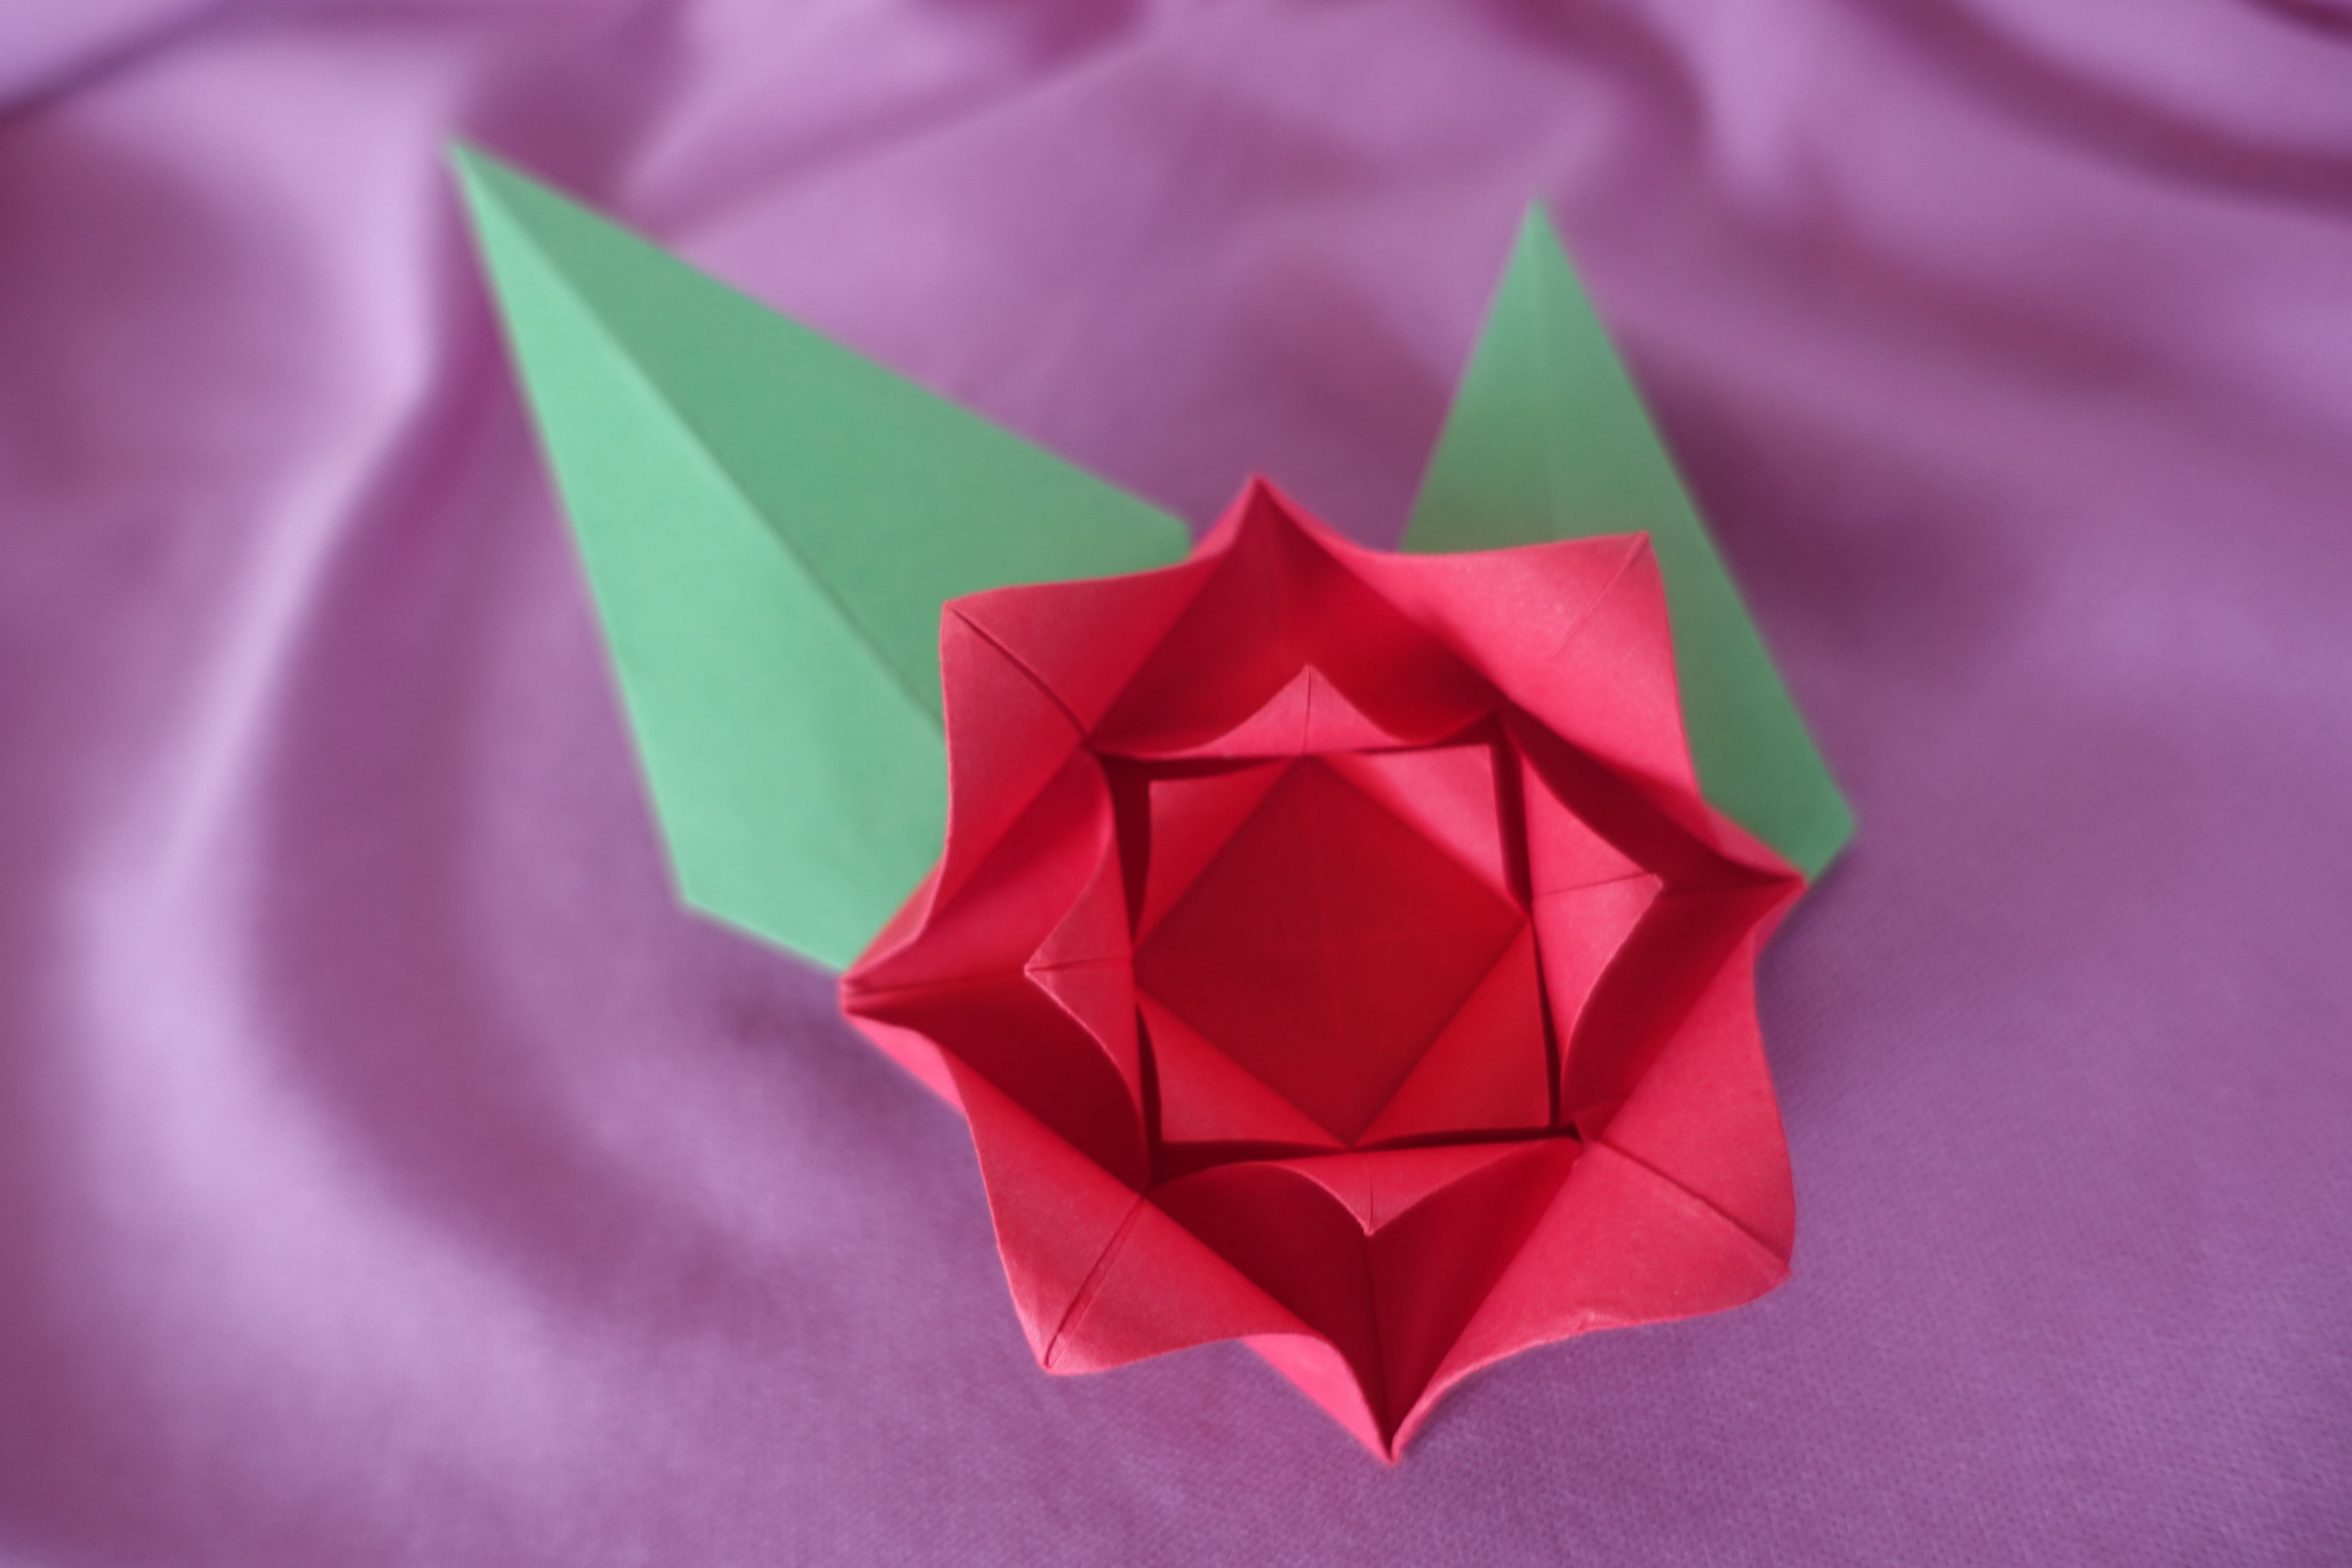 How To Make An Origami Rose Easy Make An Easy Origami Rose